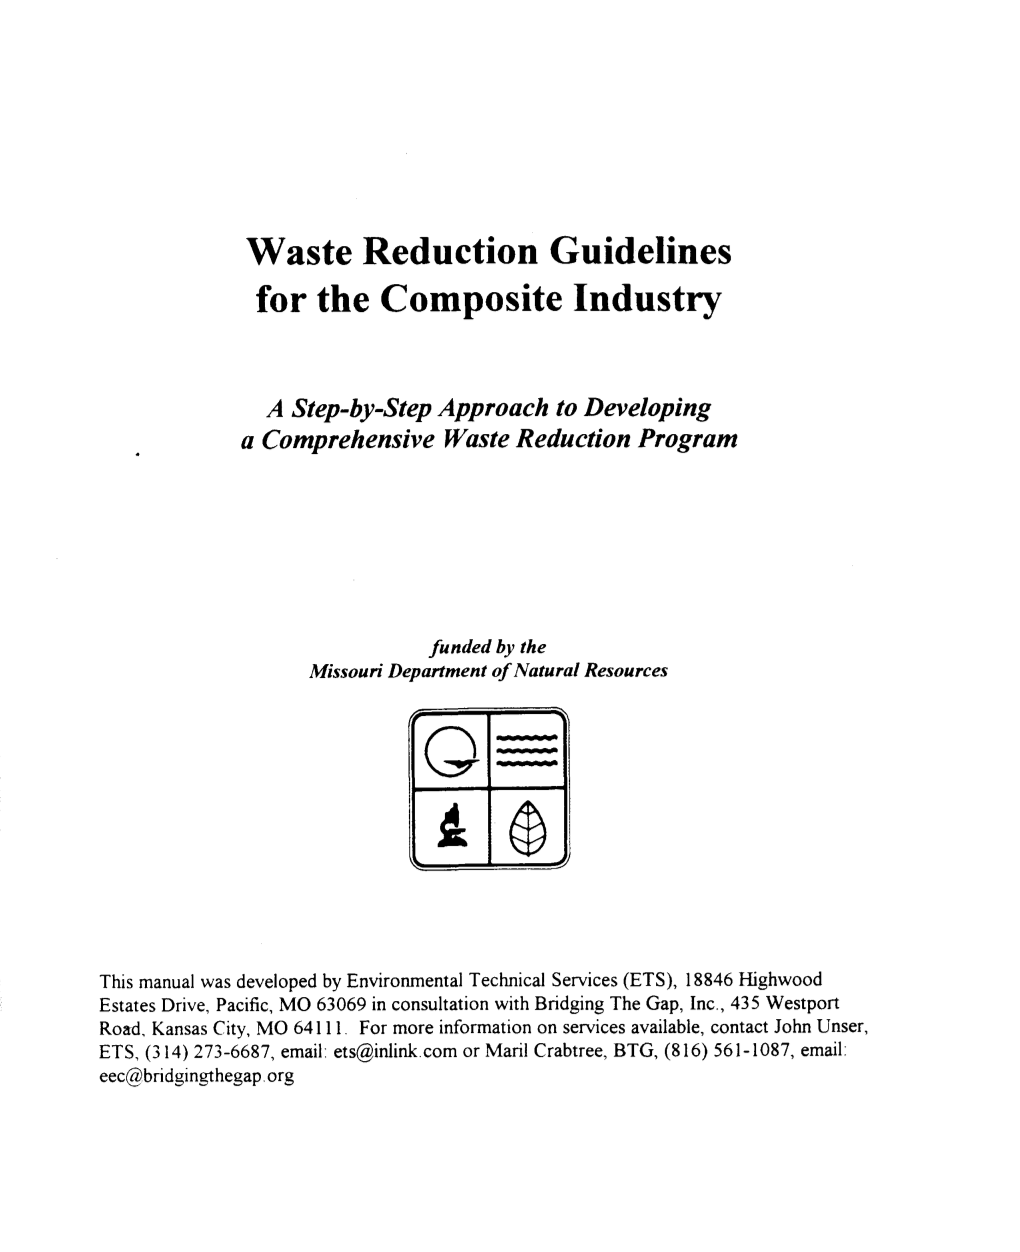 Waste Reduction Guidelines for the Composite Industry